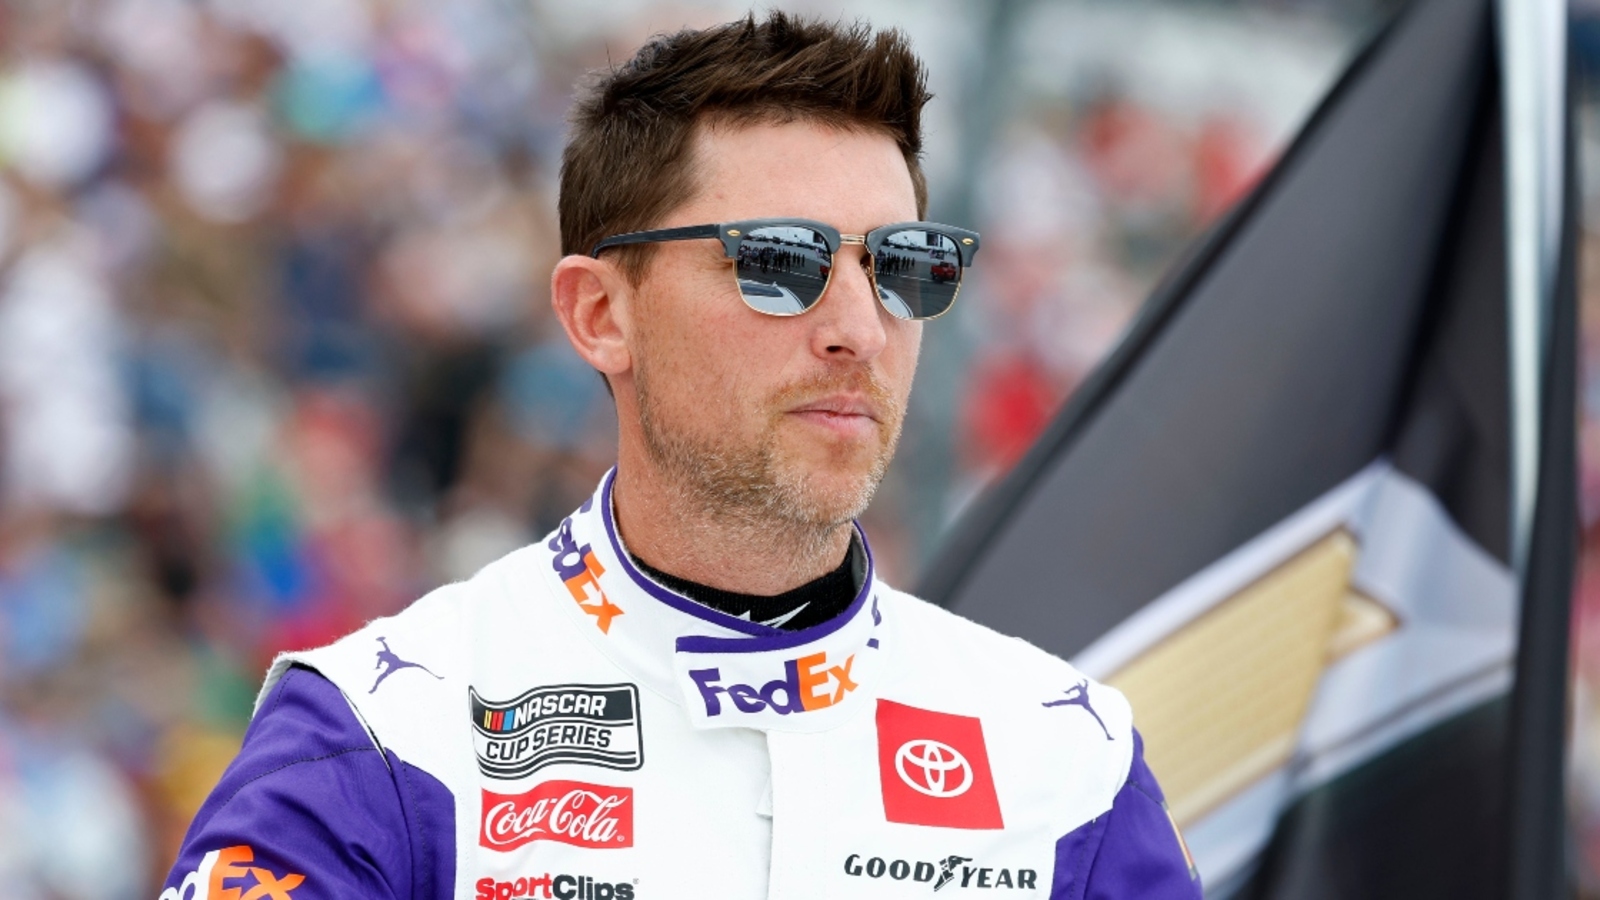 Kyle Petty: Denny Hamlin ‘is the class of this generation’ of NASCAR drivers